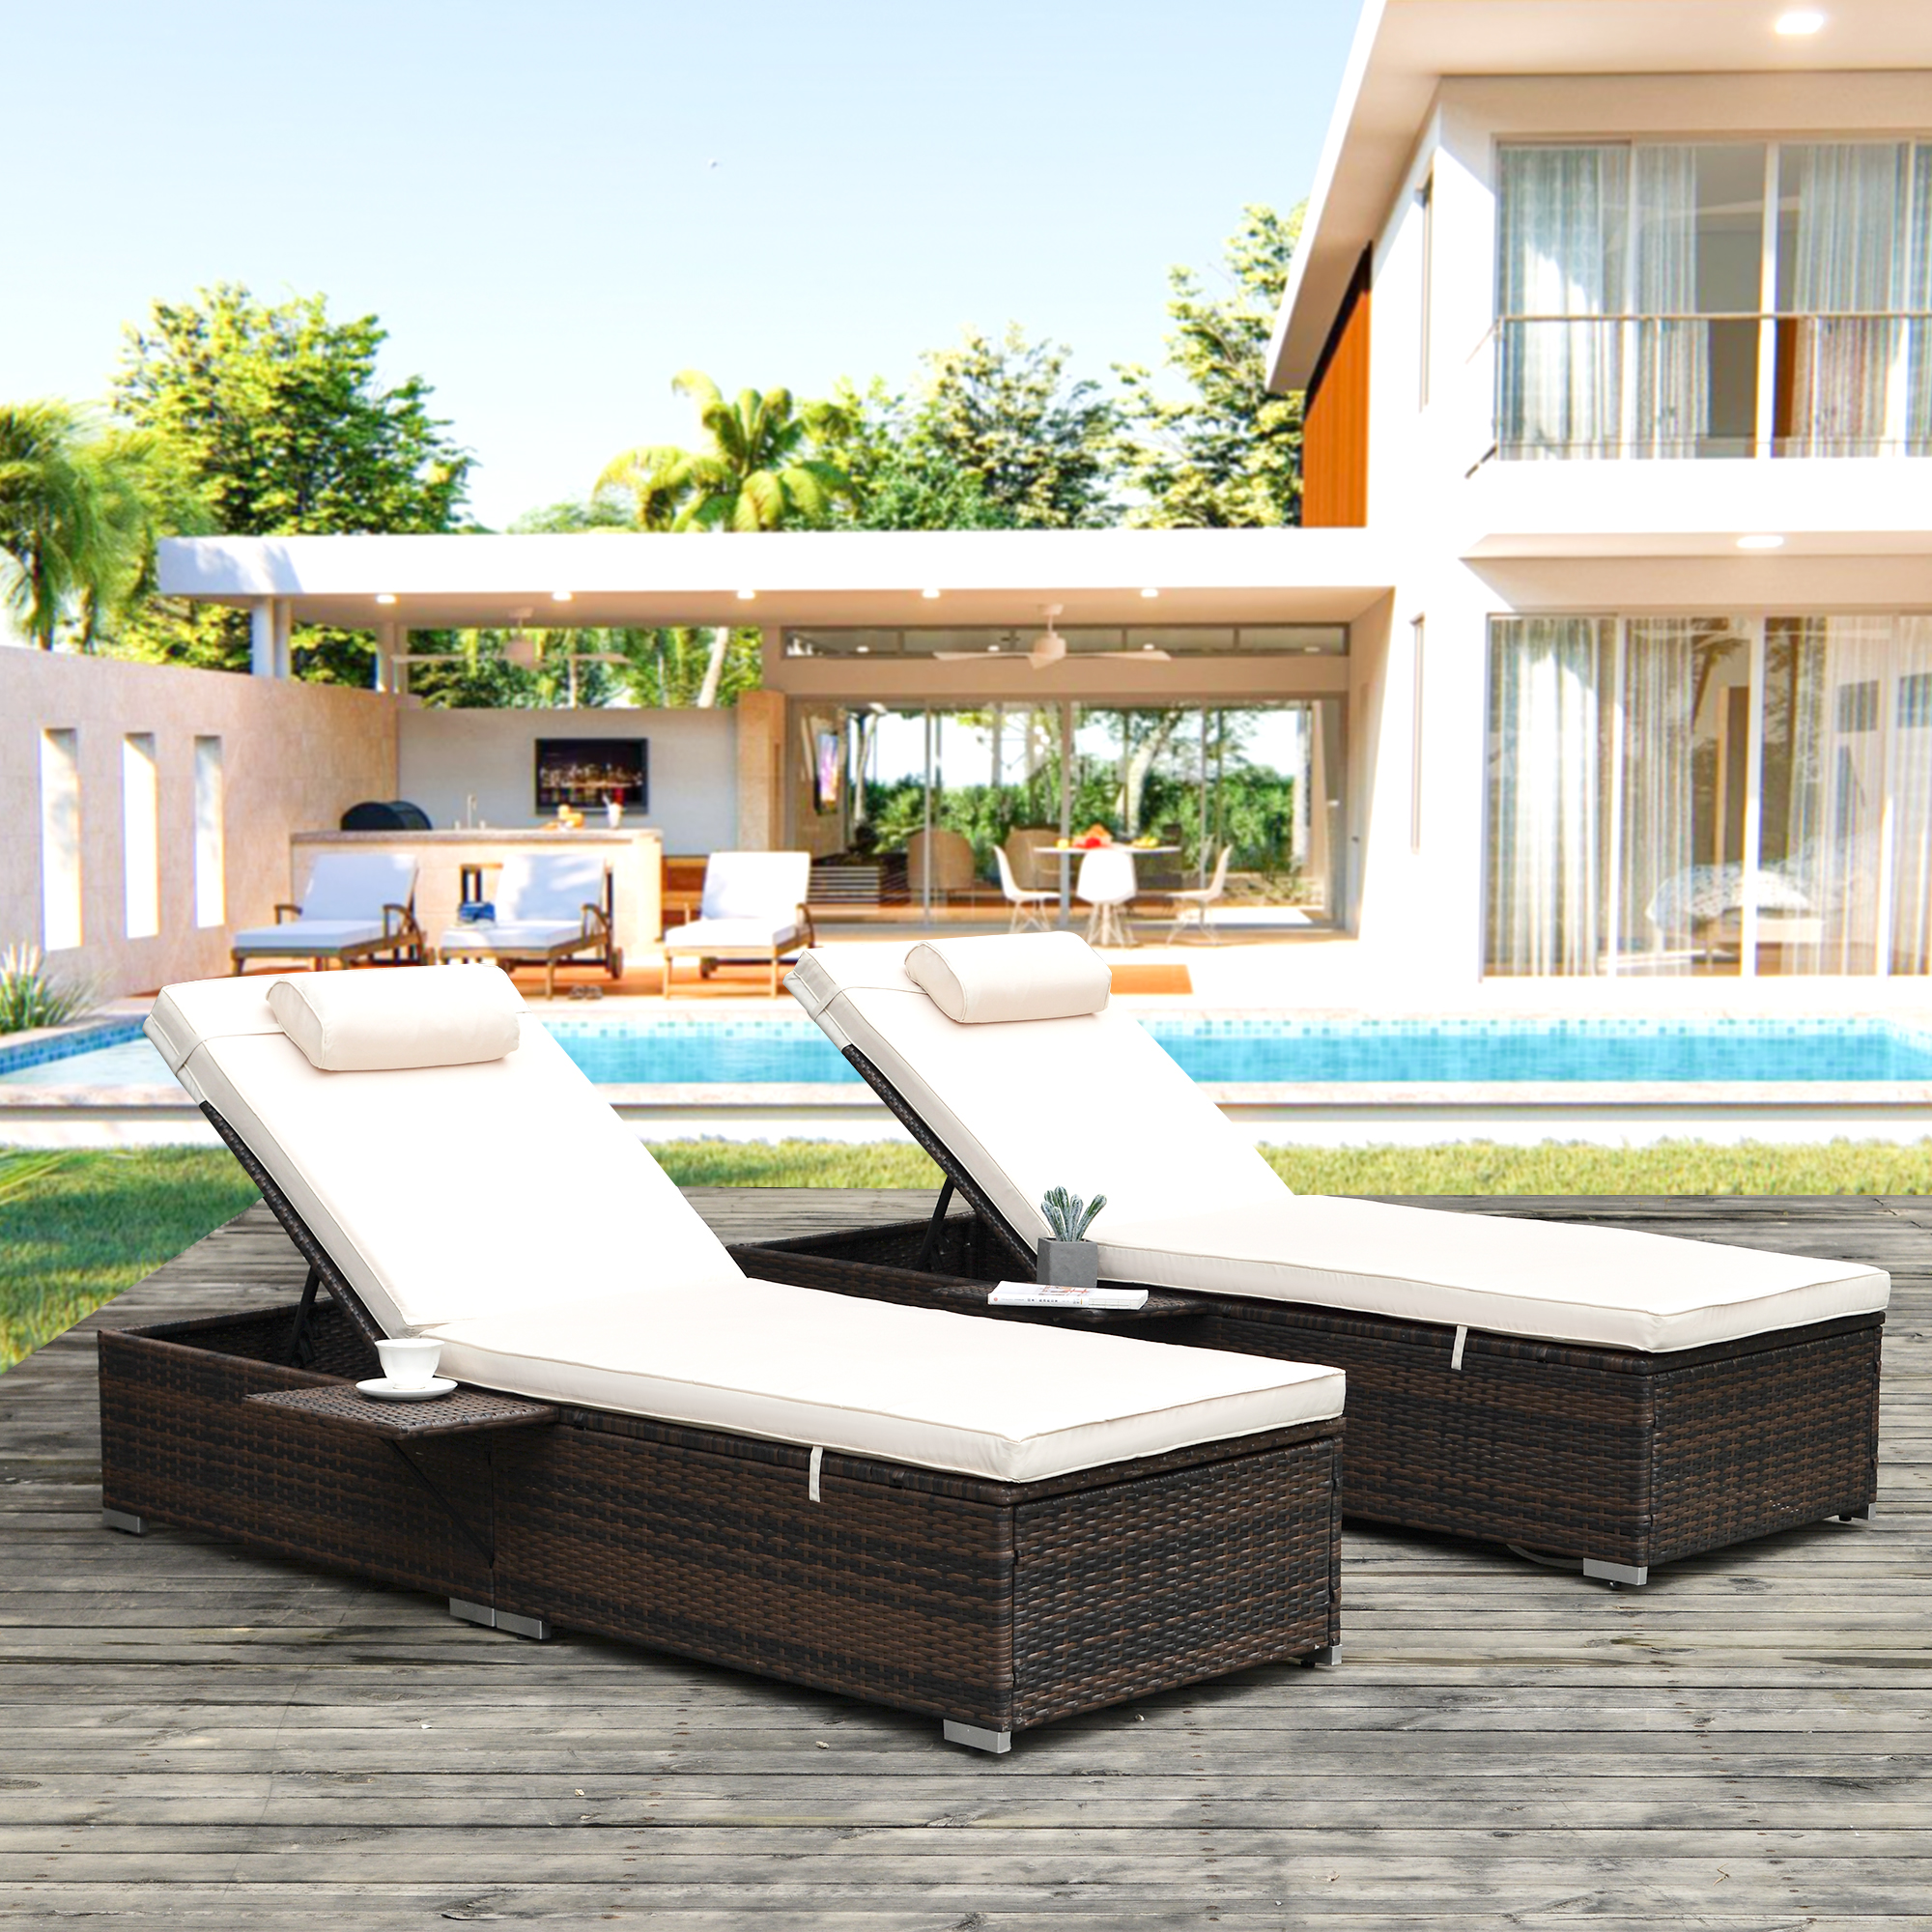 Chaise Lounge Chairs for Outside 2 Pieces, Patio Adjustable Lounge Chairs Set of 2 with Side Table, Outdoor Rattan Wicker Pool Chaise Lounge Chairs Cushioned Poolside Chaise Lounge Set, Beige - image 1 of 10